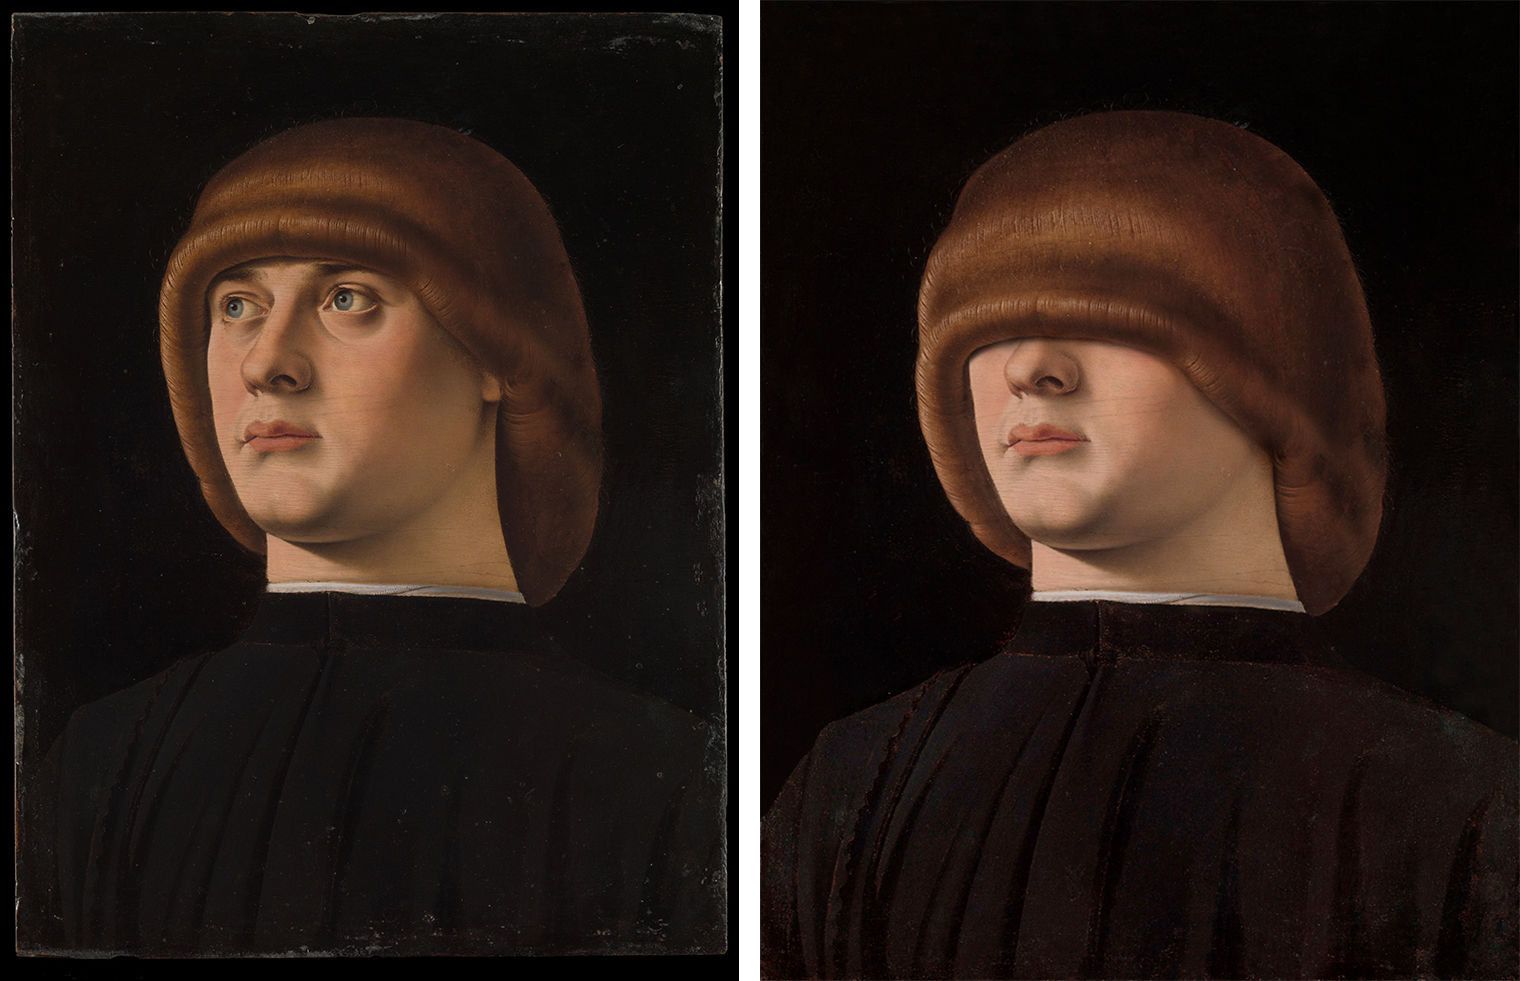 image on left shows a a portrait of a man with brown hair, image on right shows the same image with the hair covering the man's eyes